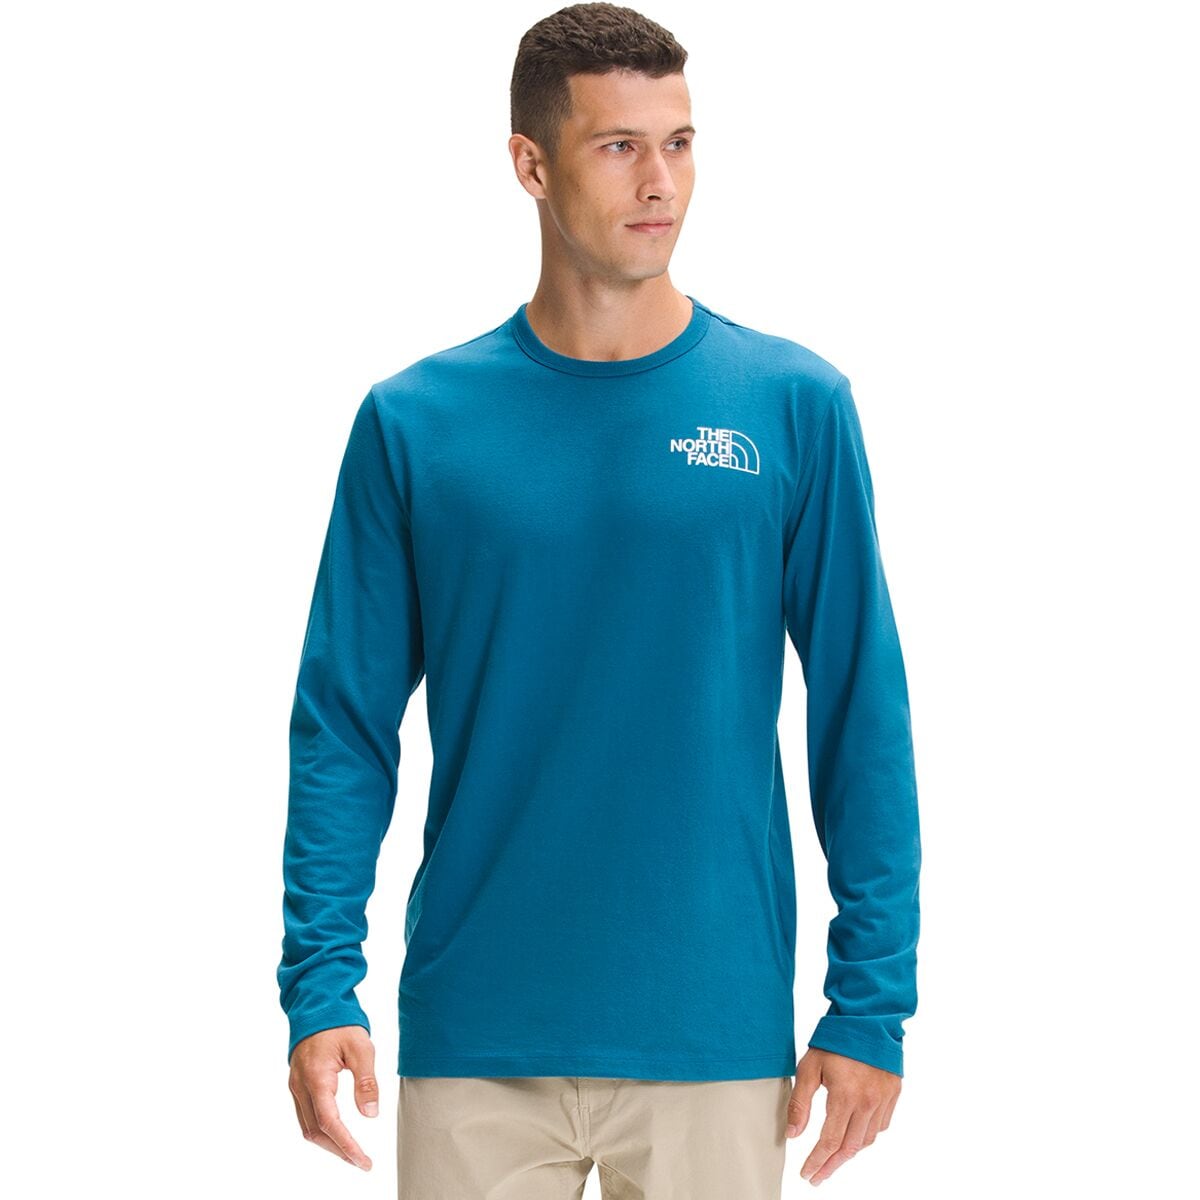 The North Face Trail Long-Sleeve T-Shirt - Men's